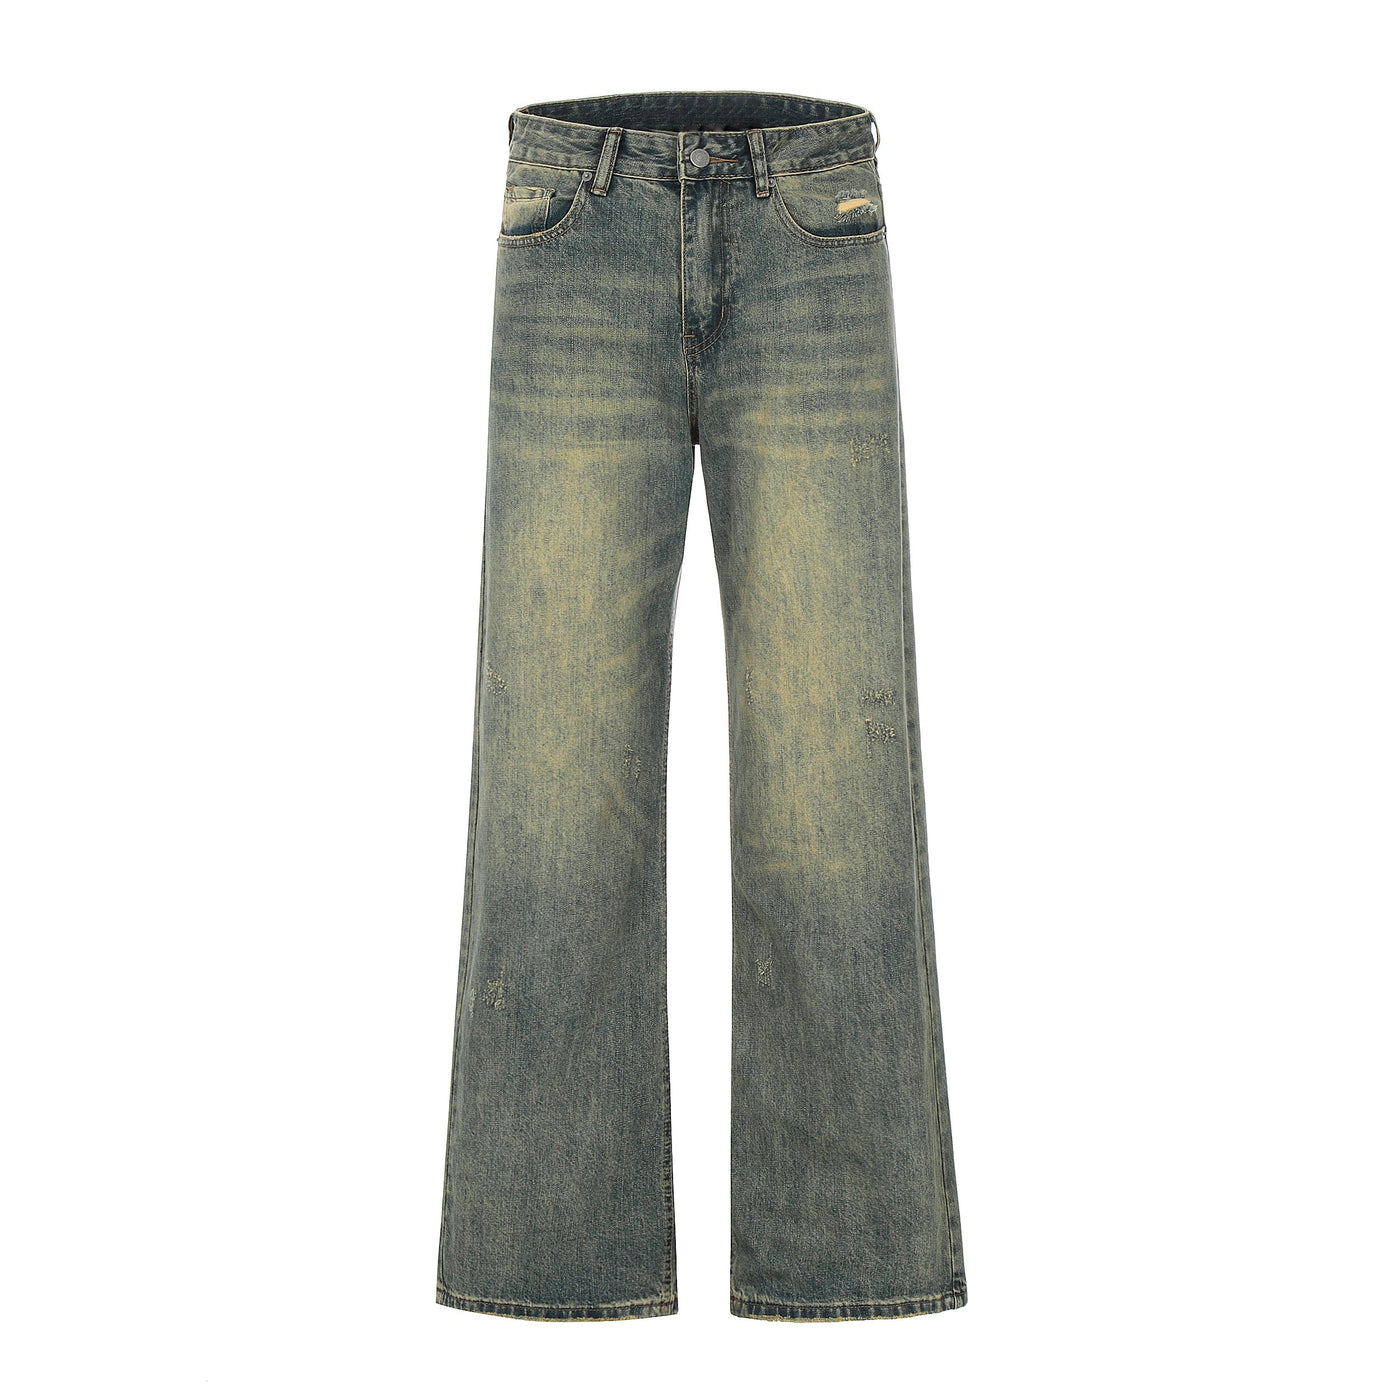 Loose Fit Washed Jeans Korean Street Fashion Jeans By In Knots Shop Online at OH Vault